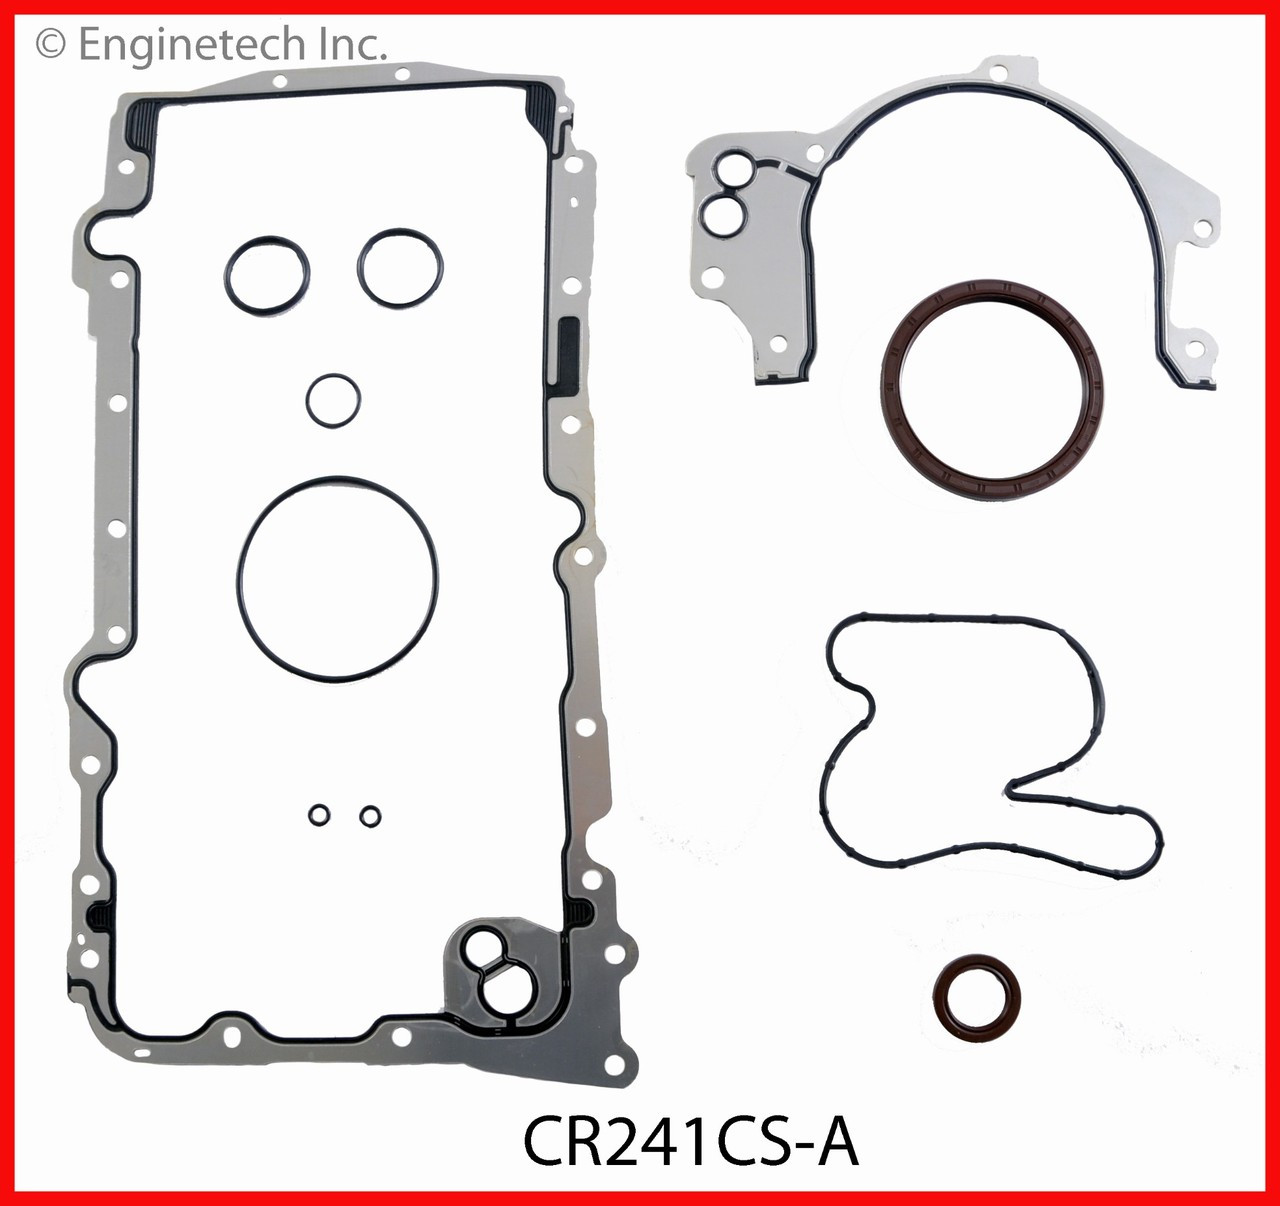 2010 Chrysler Town & Country 4.0L Engine Lower Gasket Set CR241CS-A -21